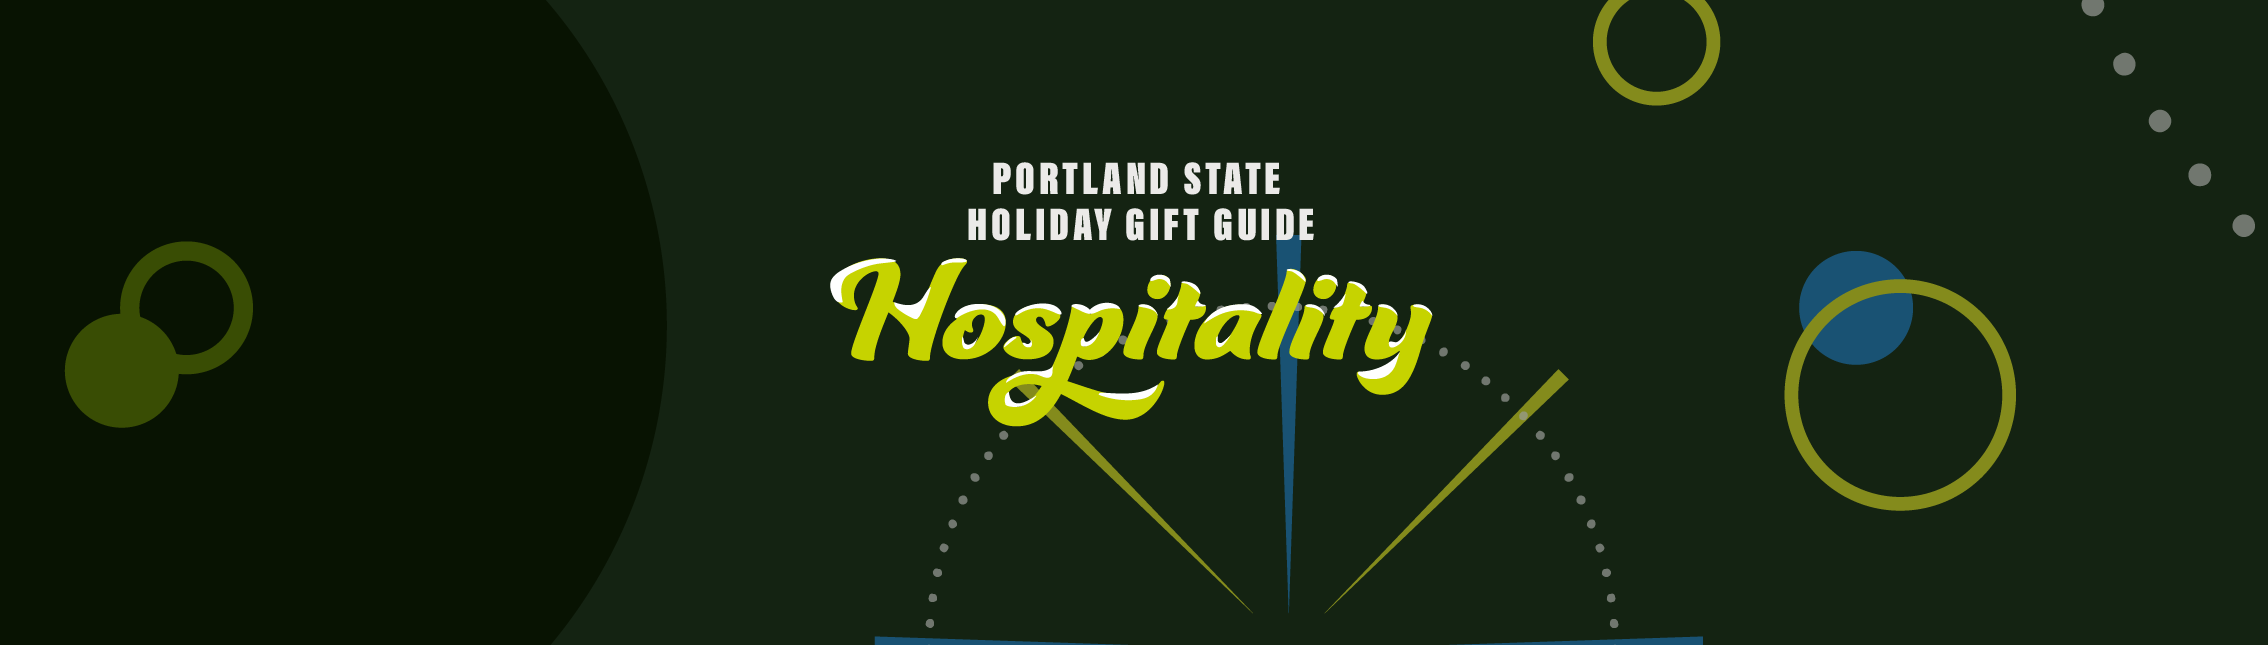 Portland State Holiday Gift Guide Hospitality